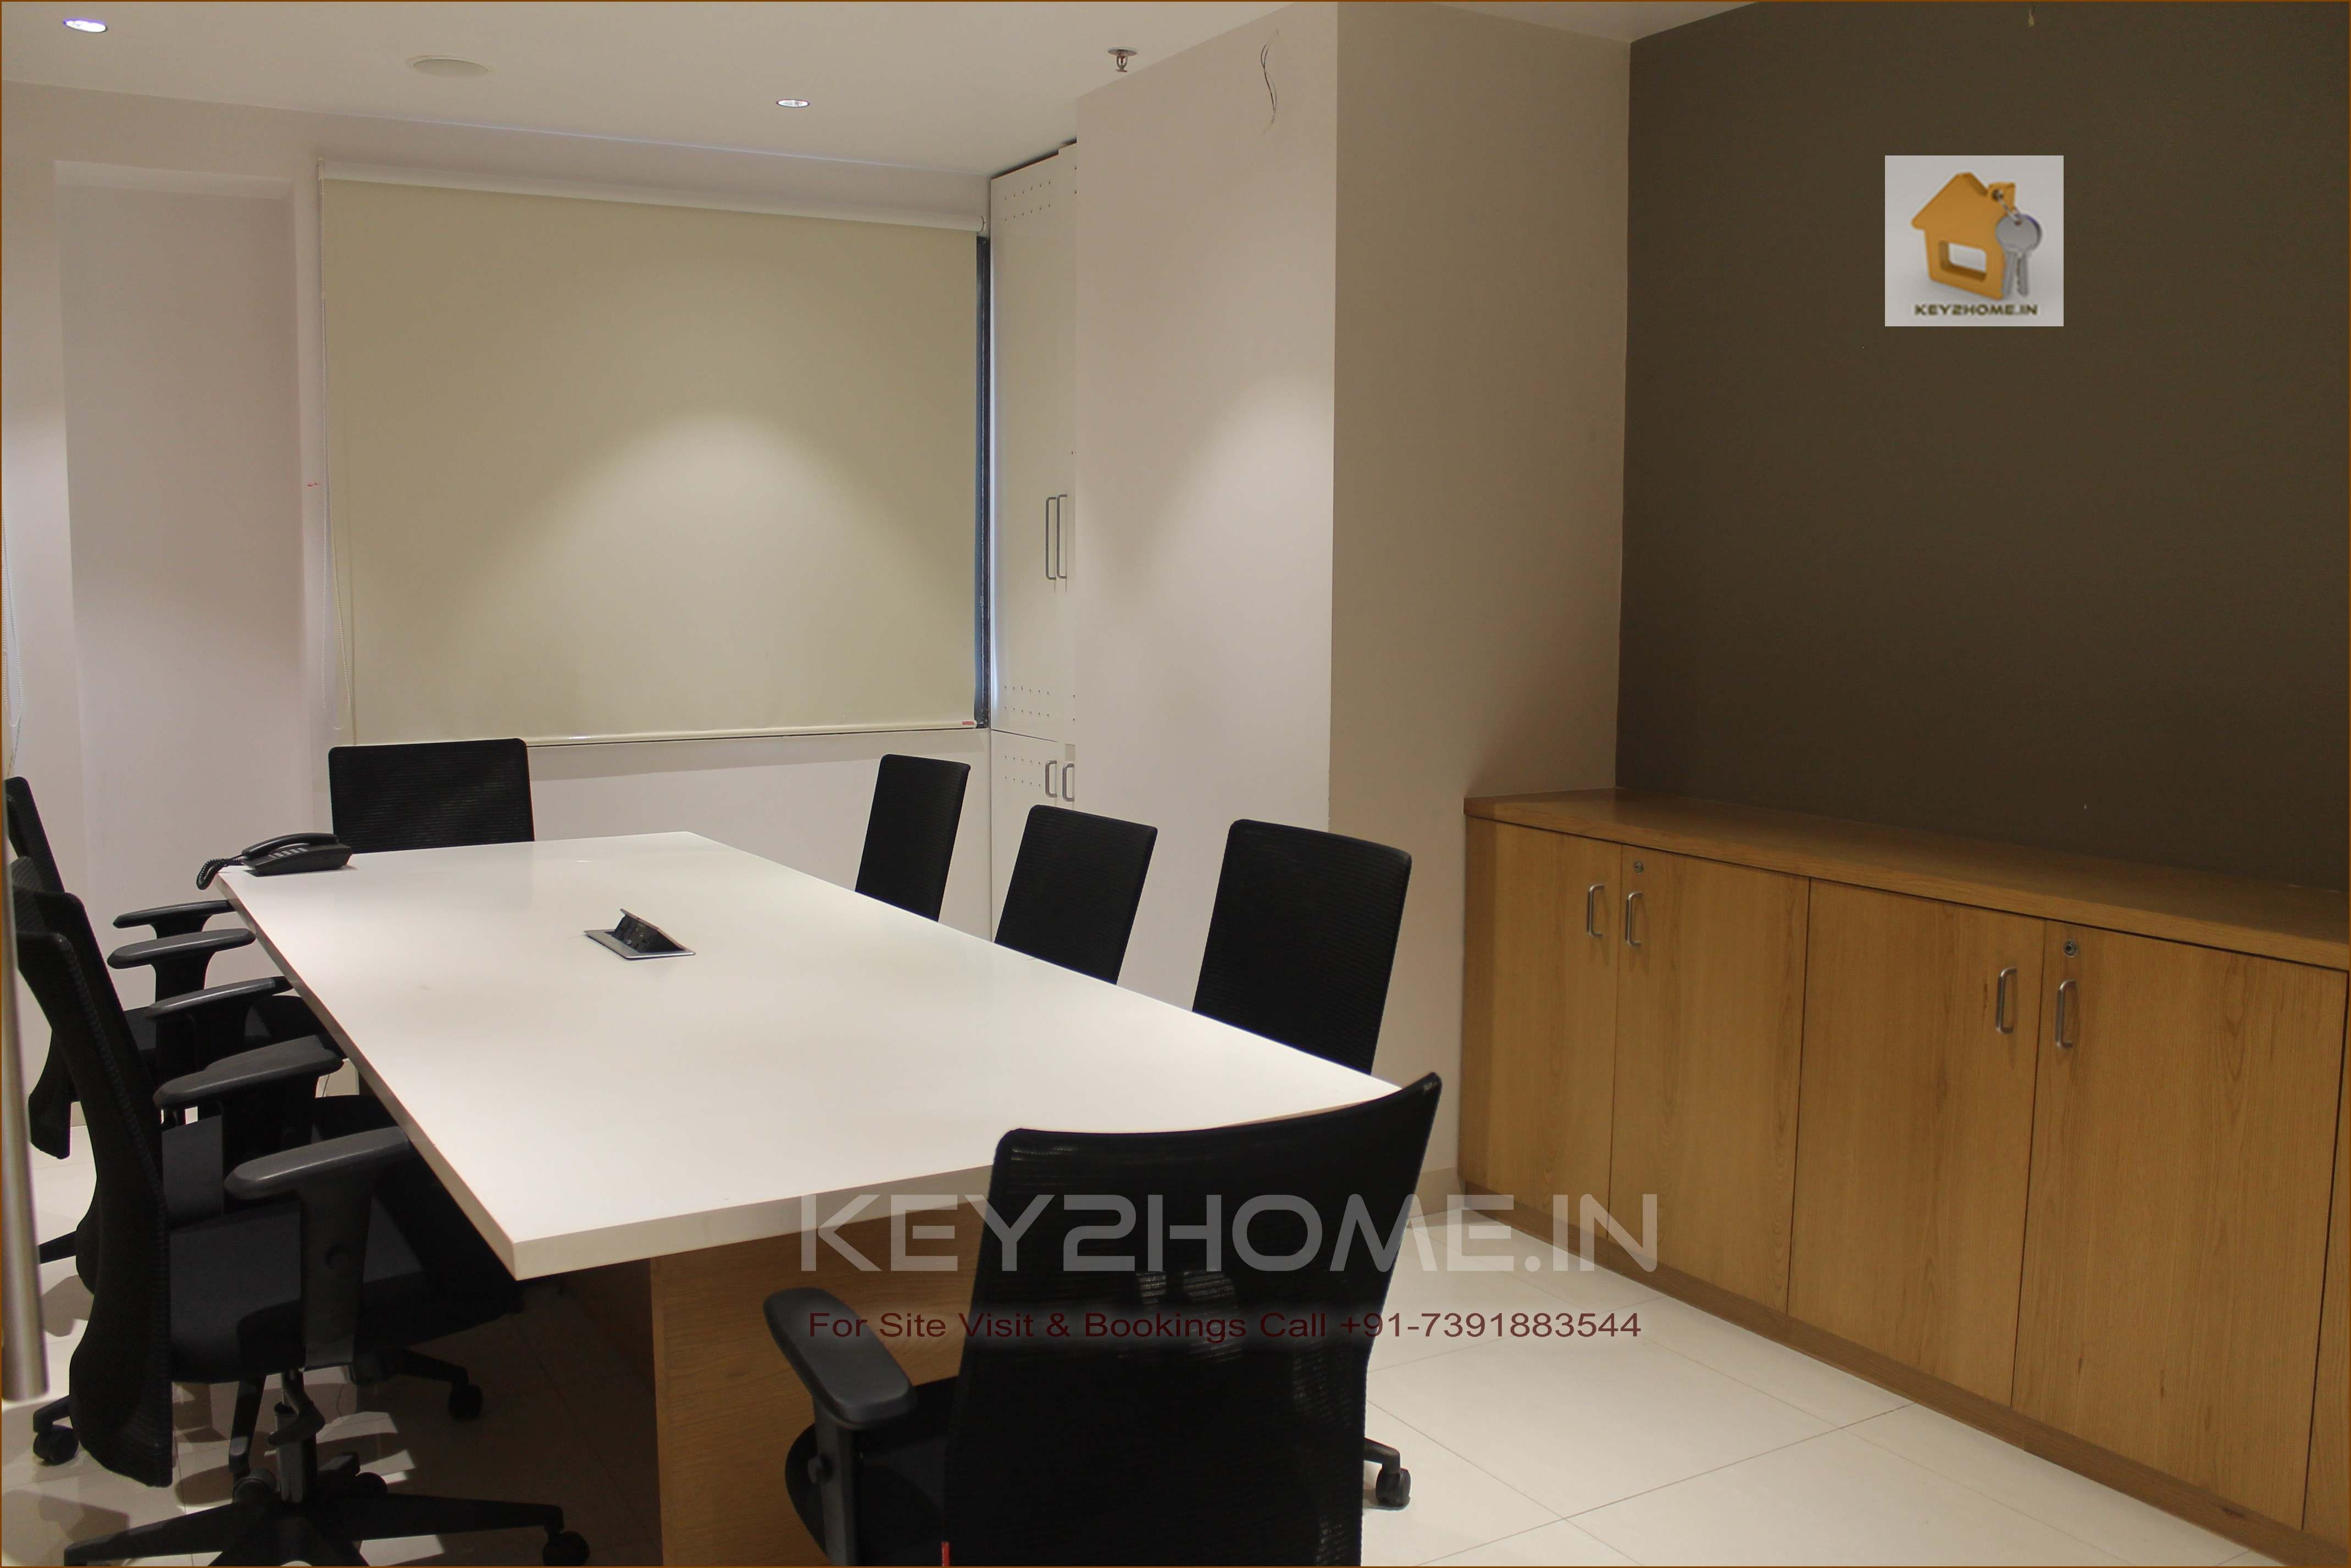 Commercial Office space on rent in Hinjewadi near wakad bridge conference room view 3